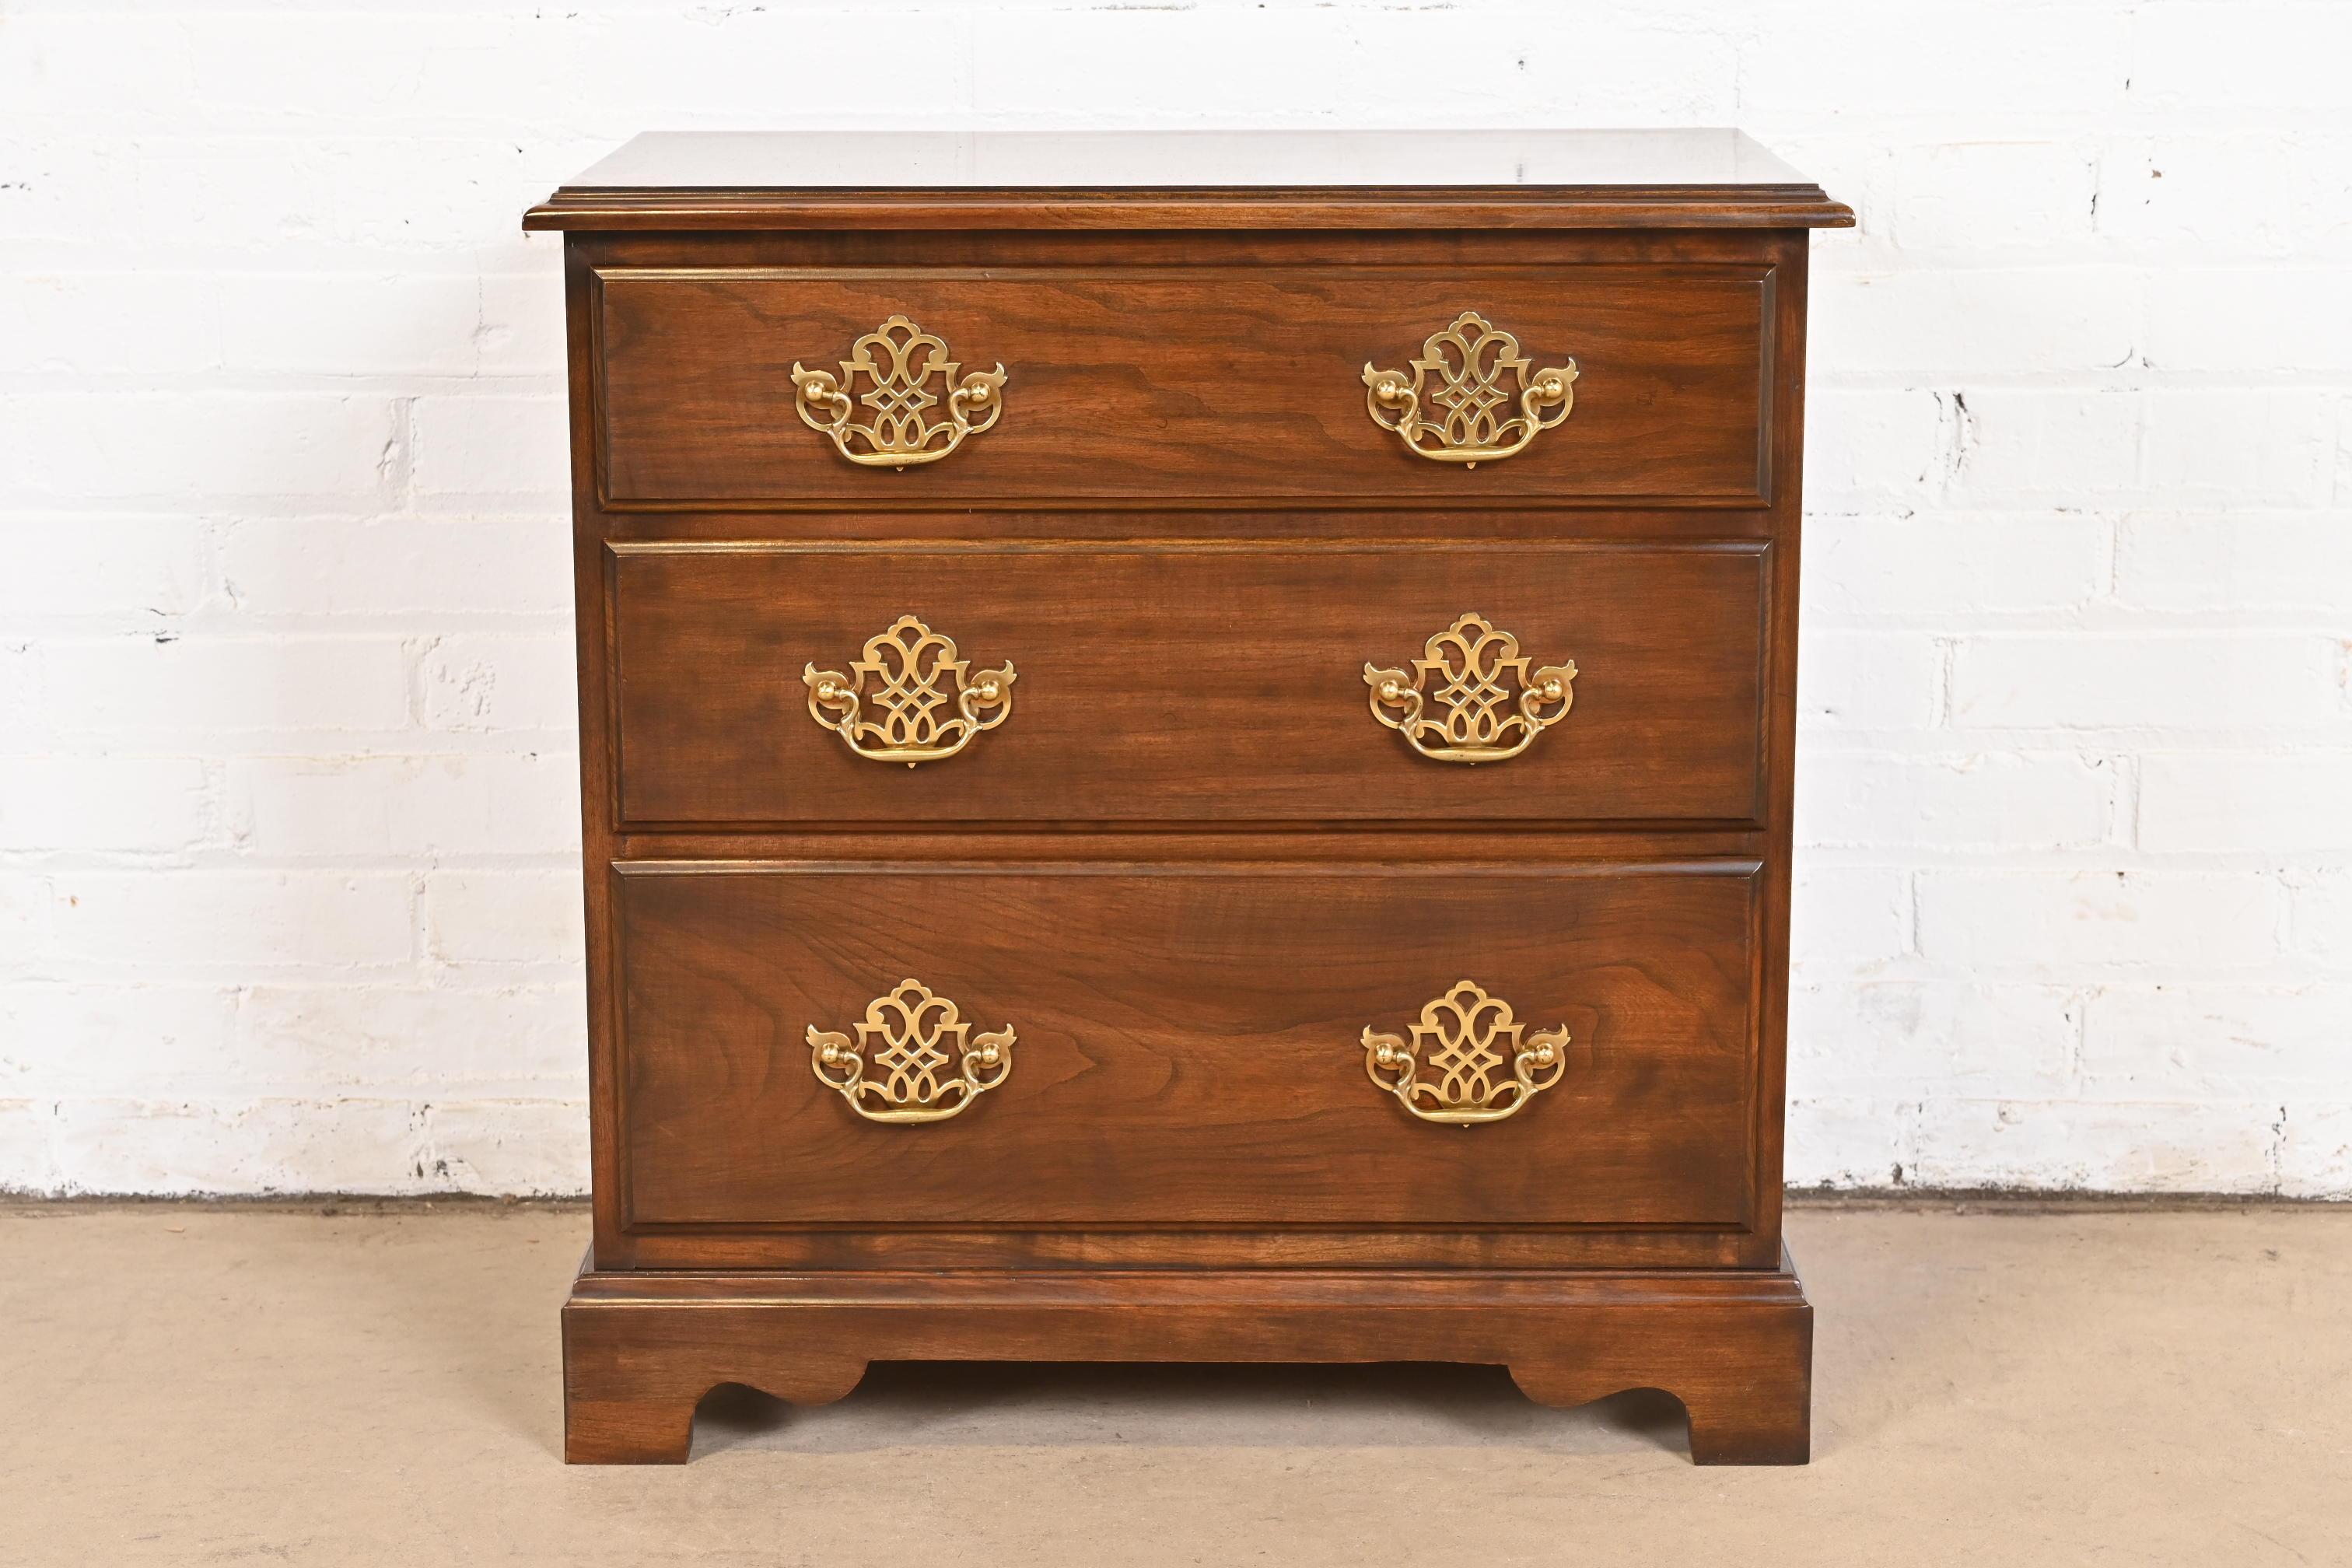 An exceptional Georgian or Chippendale style three-drawer nightstand or bachelor chest

By Harden Furniture

USA, Late 20th Century

Solid carved cherry wood, with original brass hardware.

Measures: 24